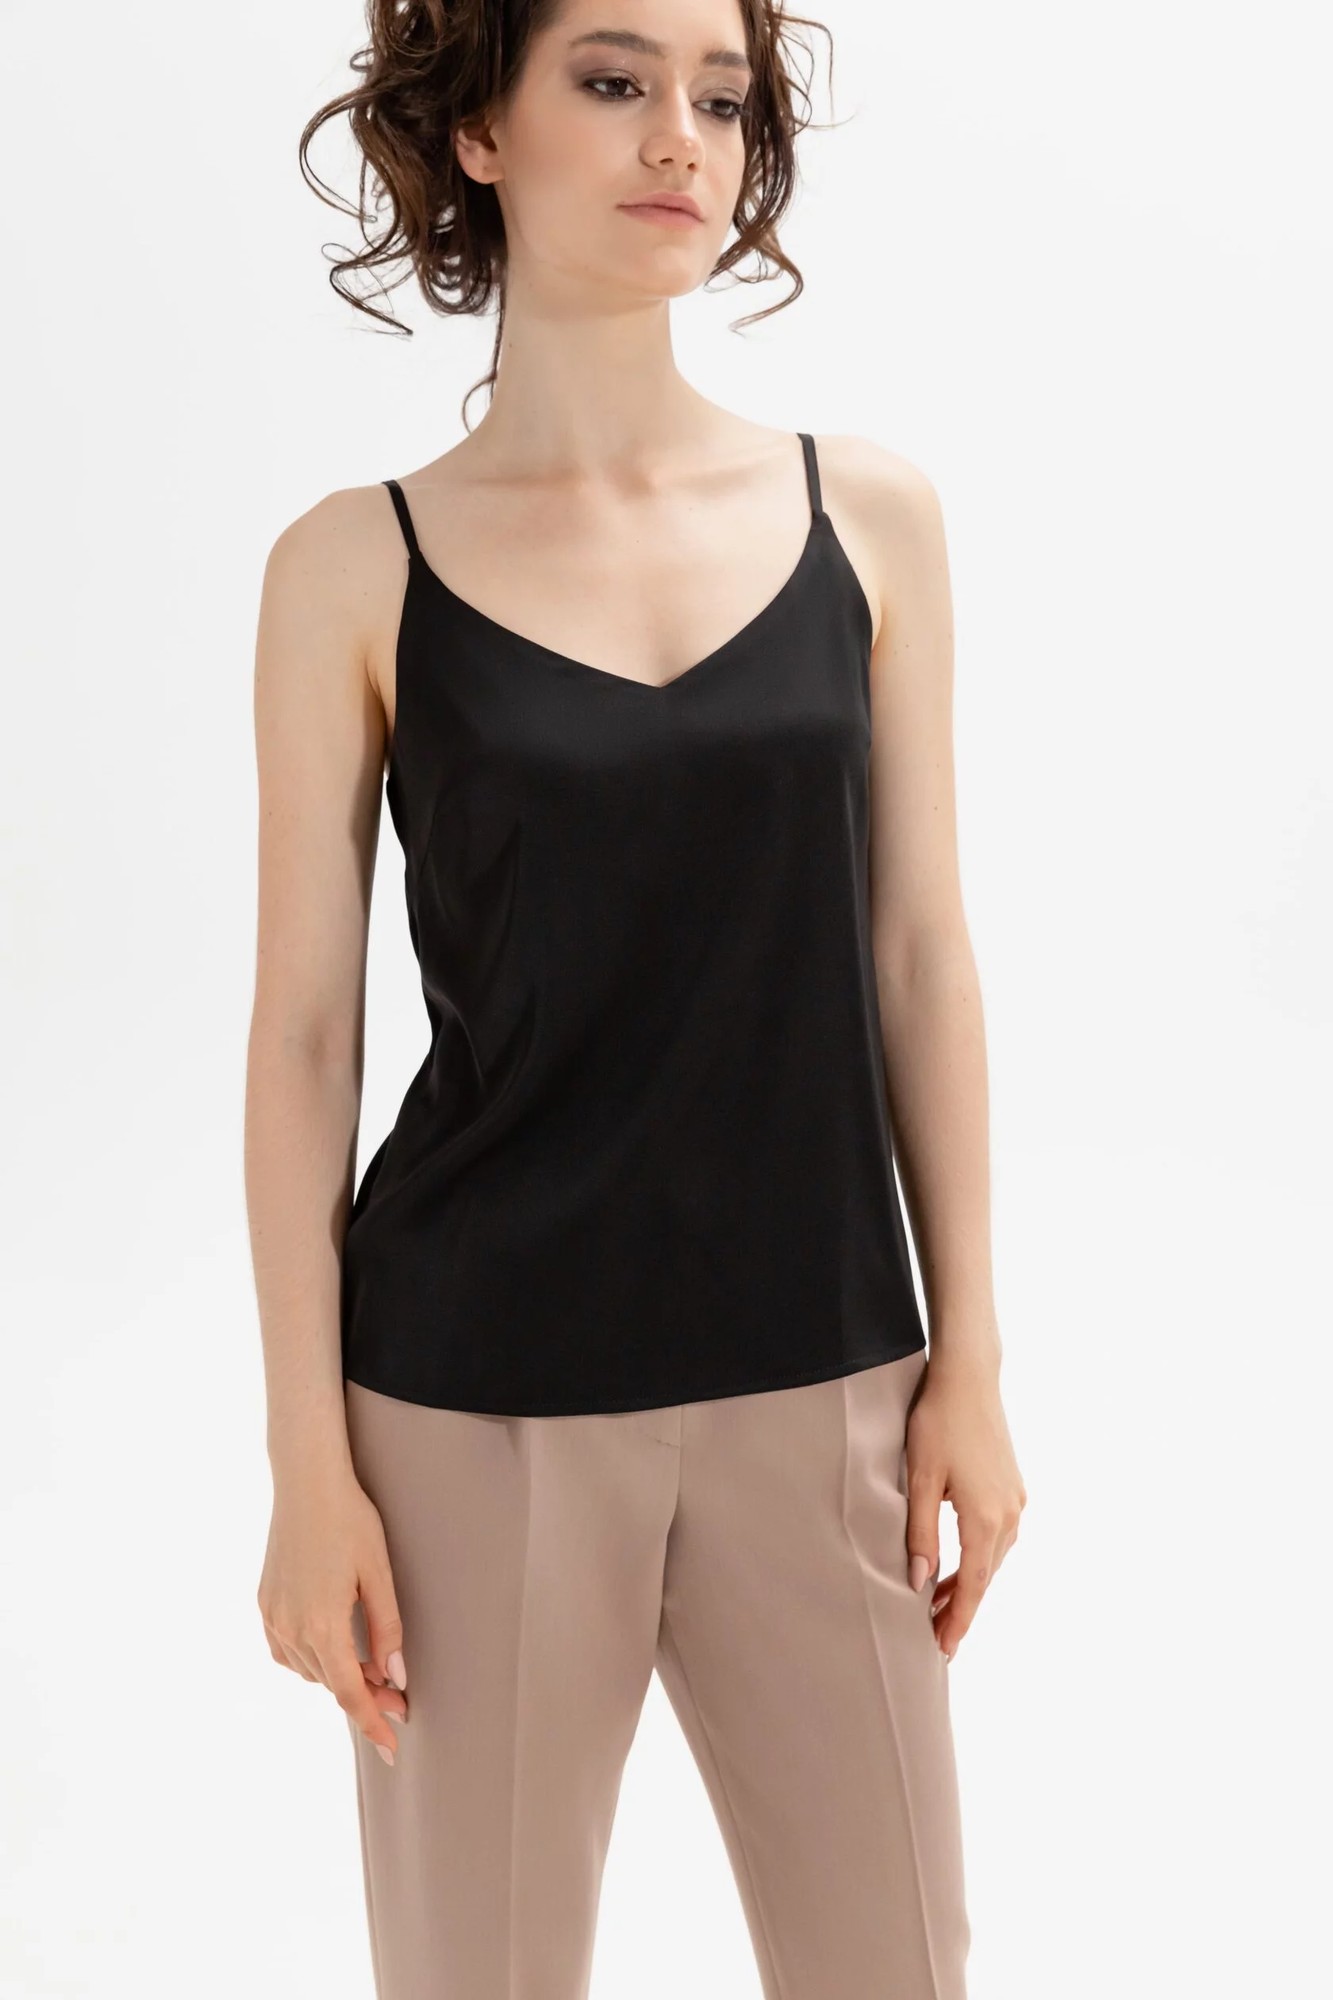 Black silk top with thin straps